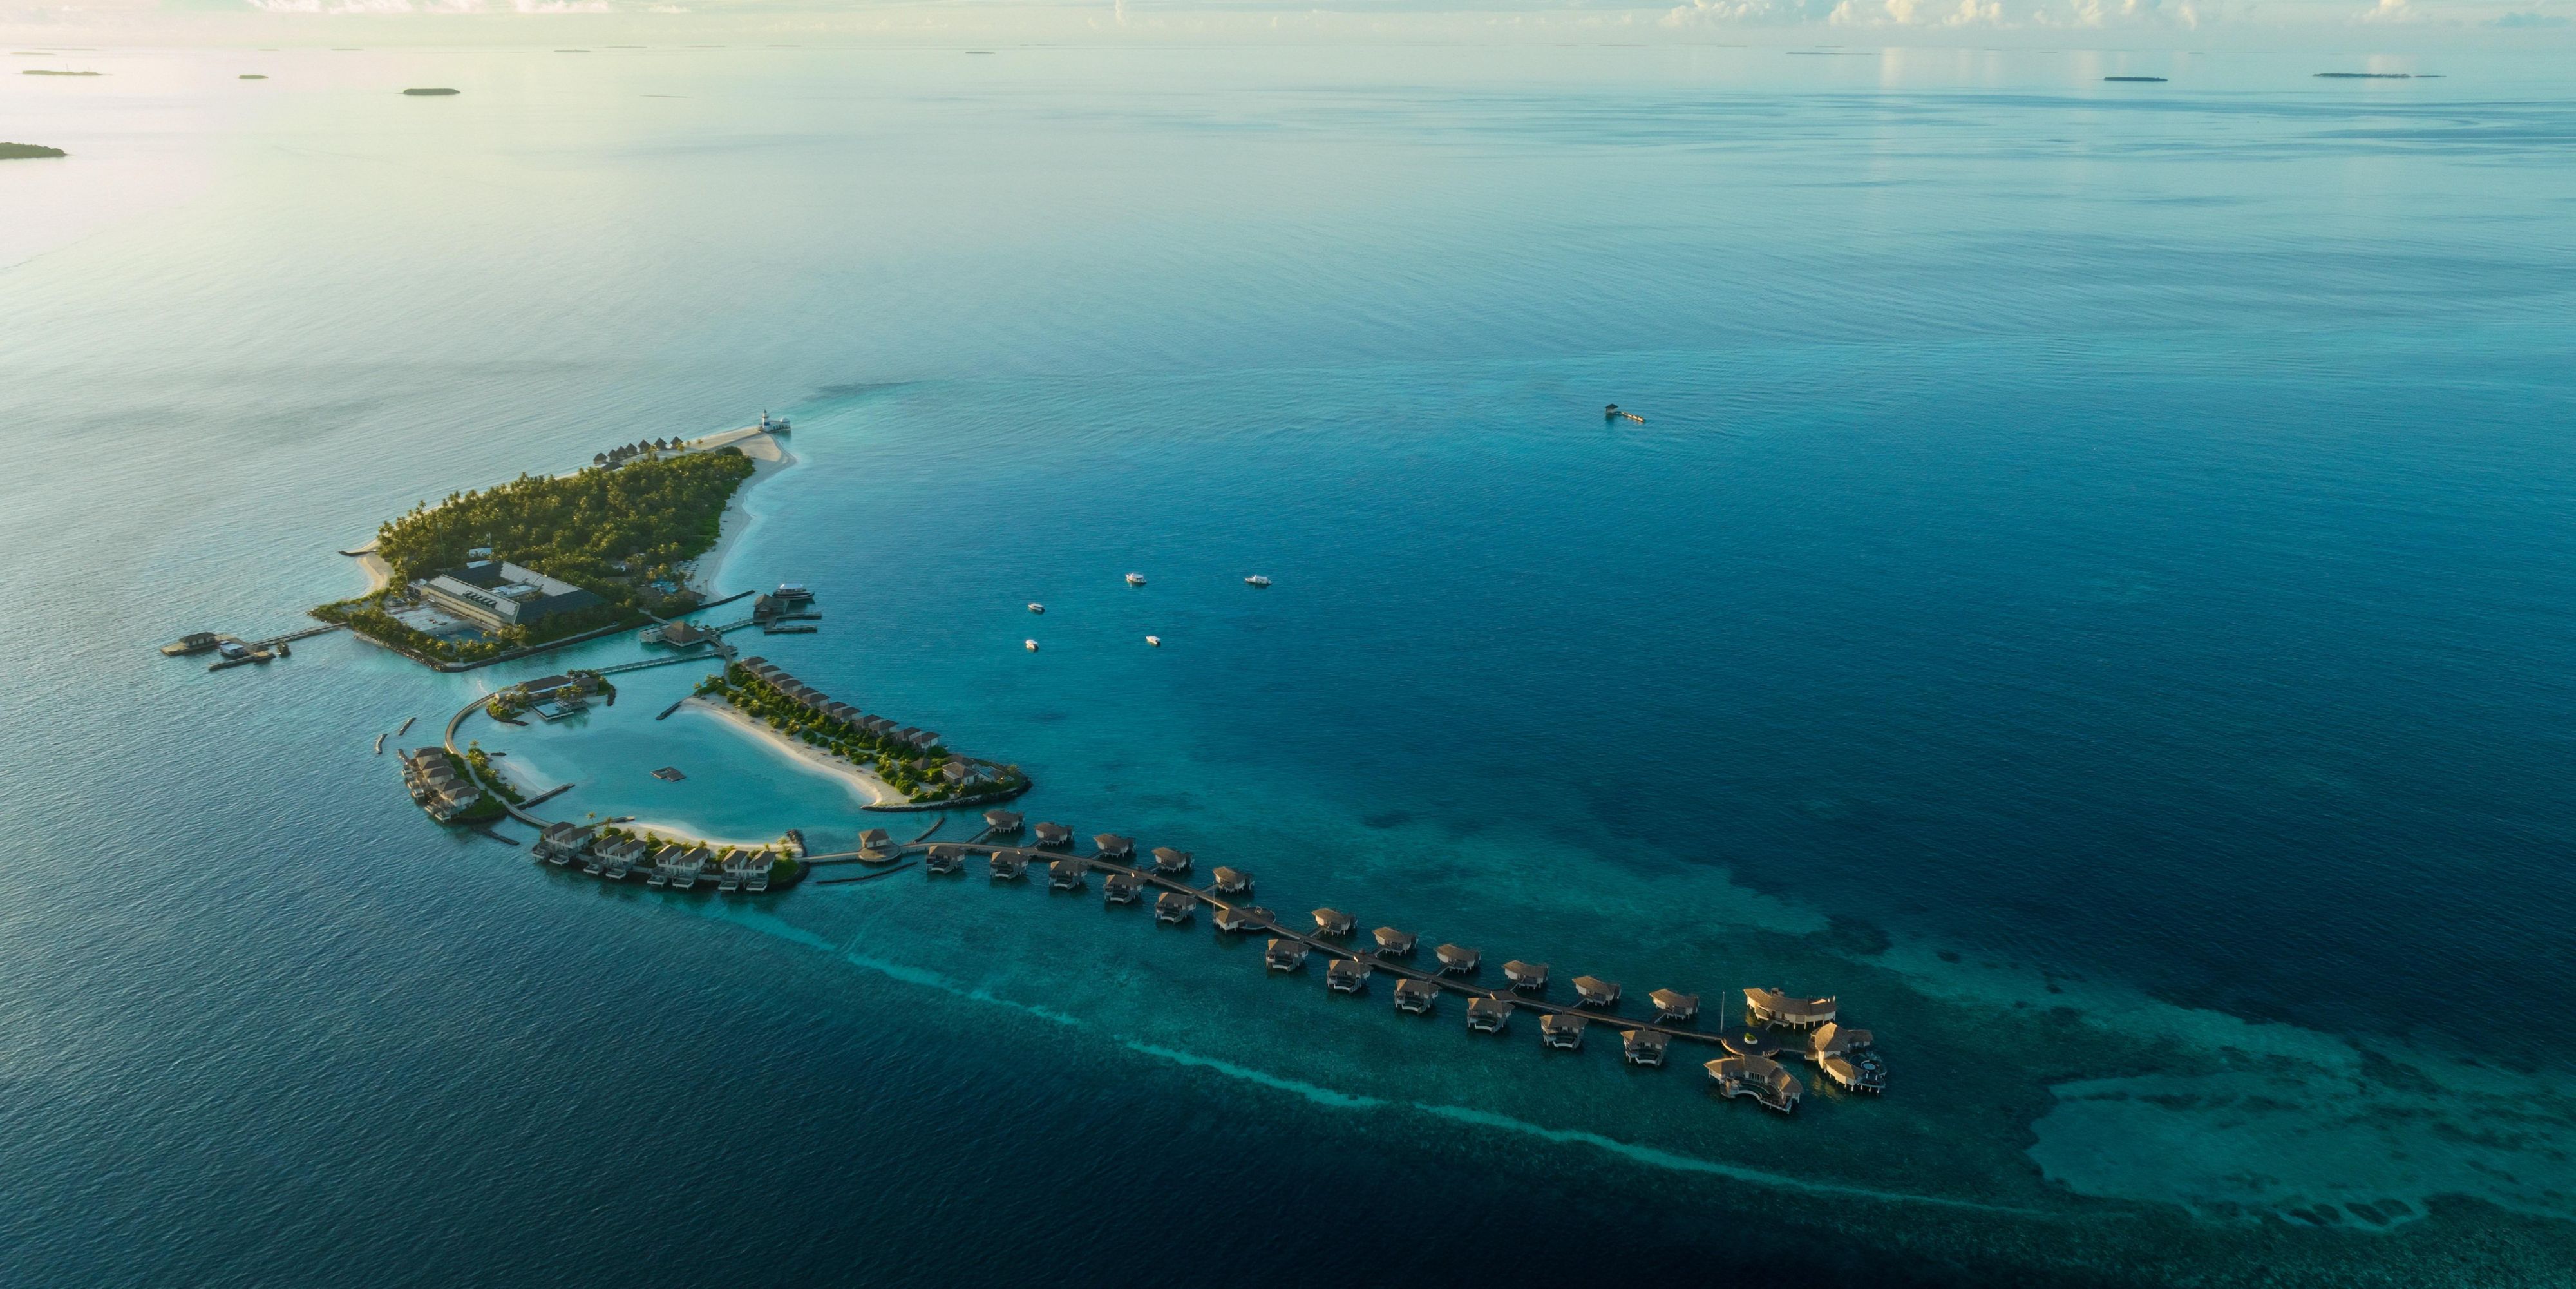 Located near the UNESCO Biosphere Reserve, our Maamunagau resort sits in a unique world of natural wonder and preservation. From breathtaking coral reefs to vibrant marine habitats, your stay here offers a rare opportunity to connect with nature and witness firsthand the importance of responsible travel and environmental protection. 